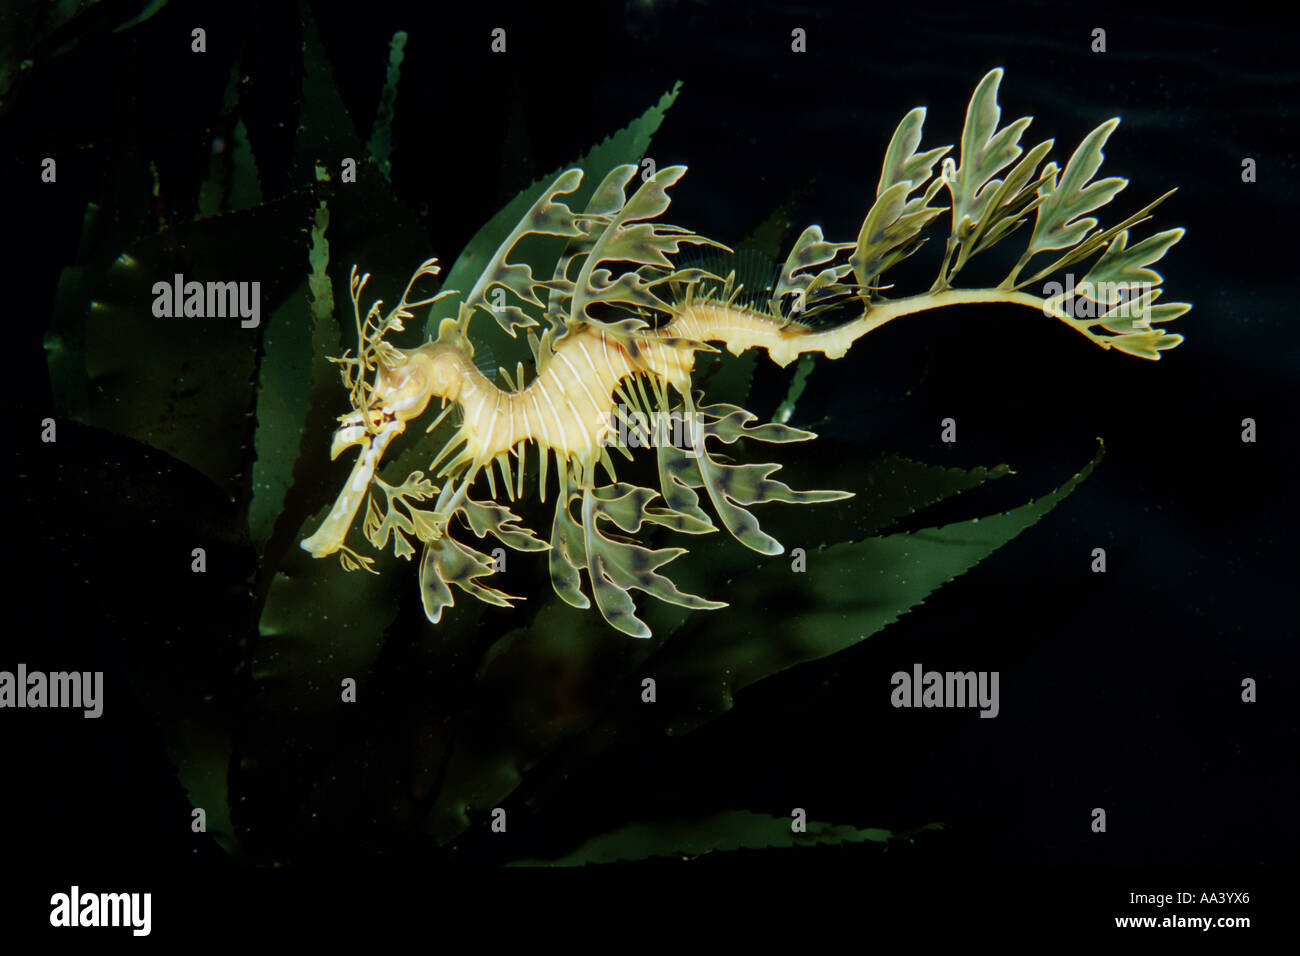 Leafy sea dragon Phyllopteryx eques matches its surroundings with fins that look like clumps of algae Australia c Stock Photo